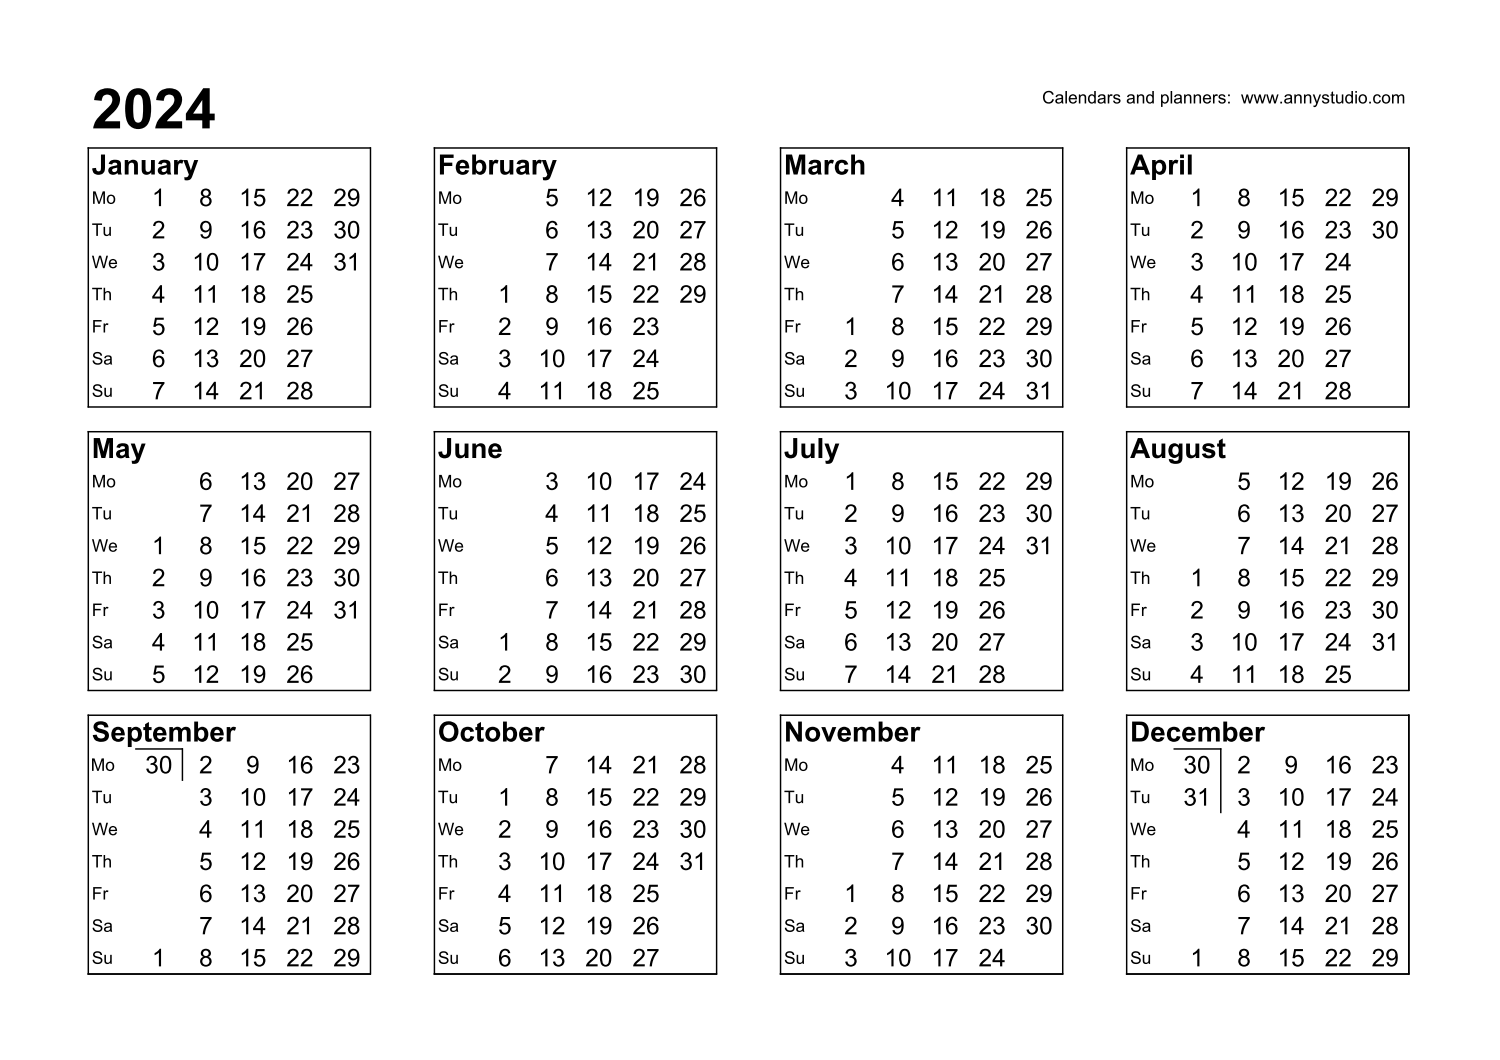 Free Printable Calendars And Planners 2024, 2025 And 2026 within Free Printable Calendar 2024 Big Numbers